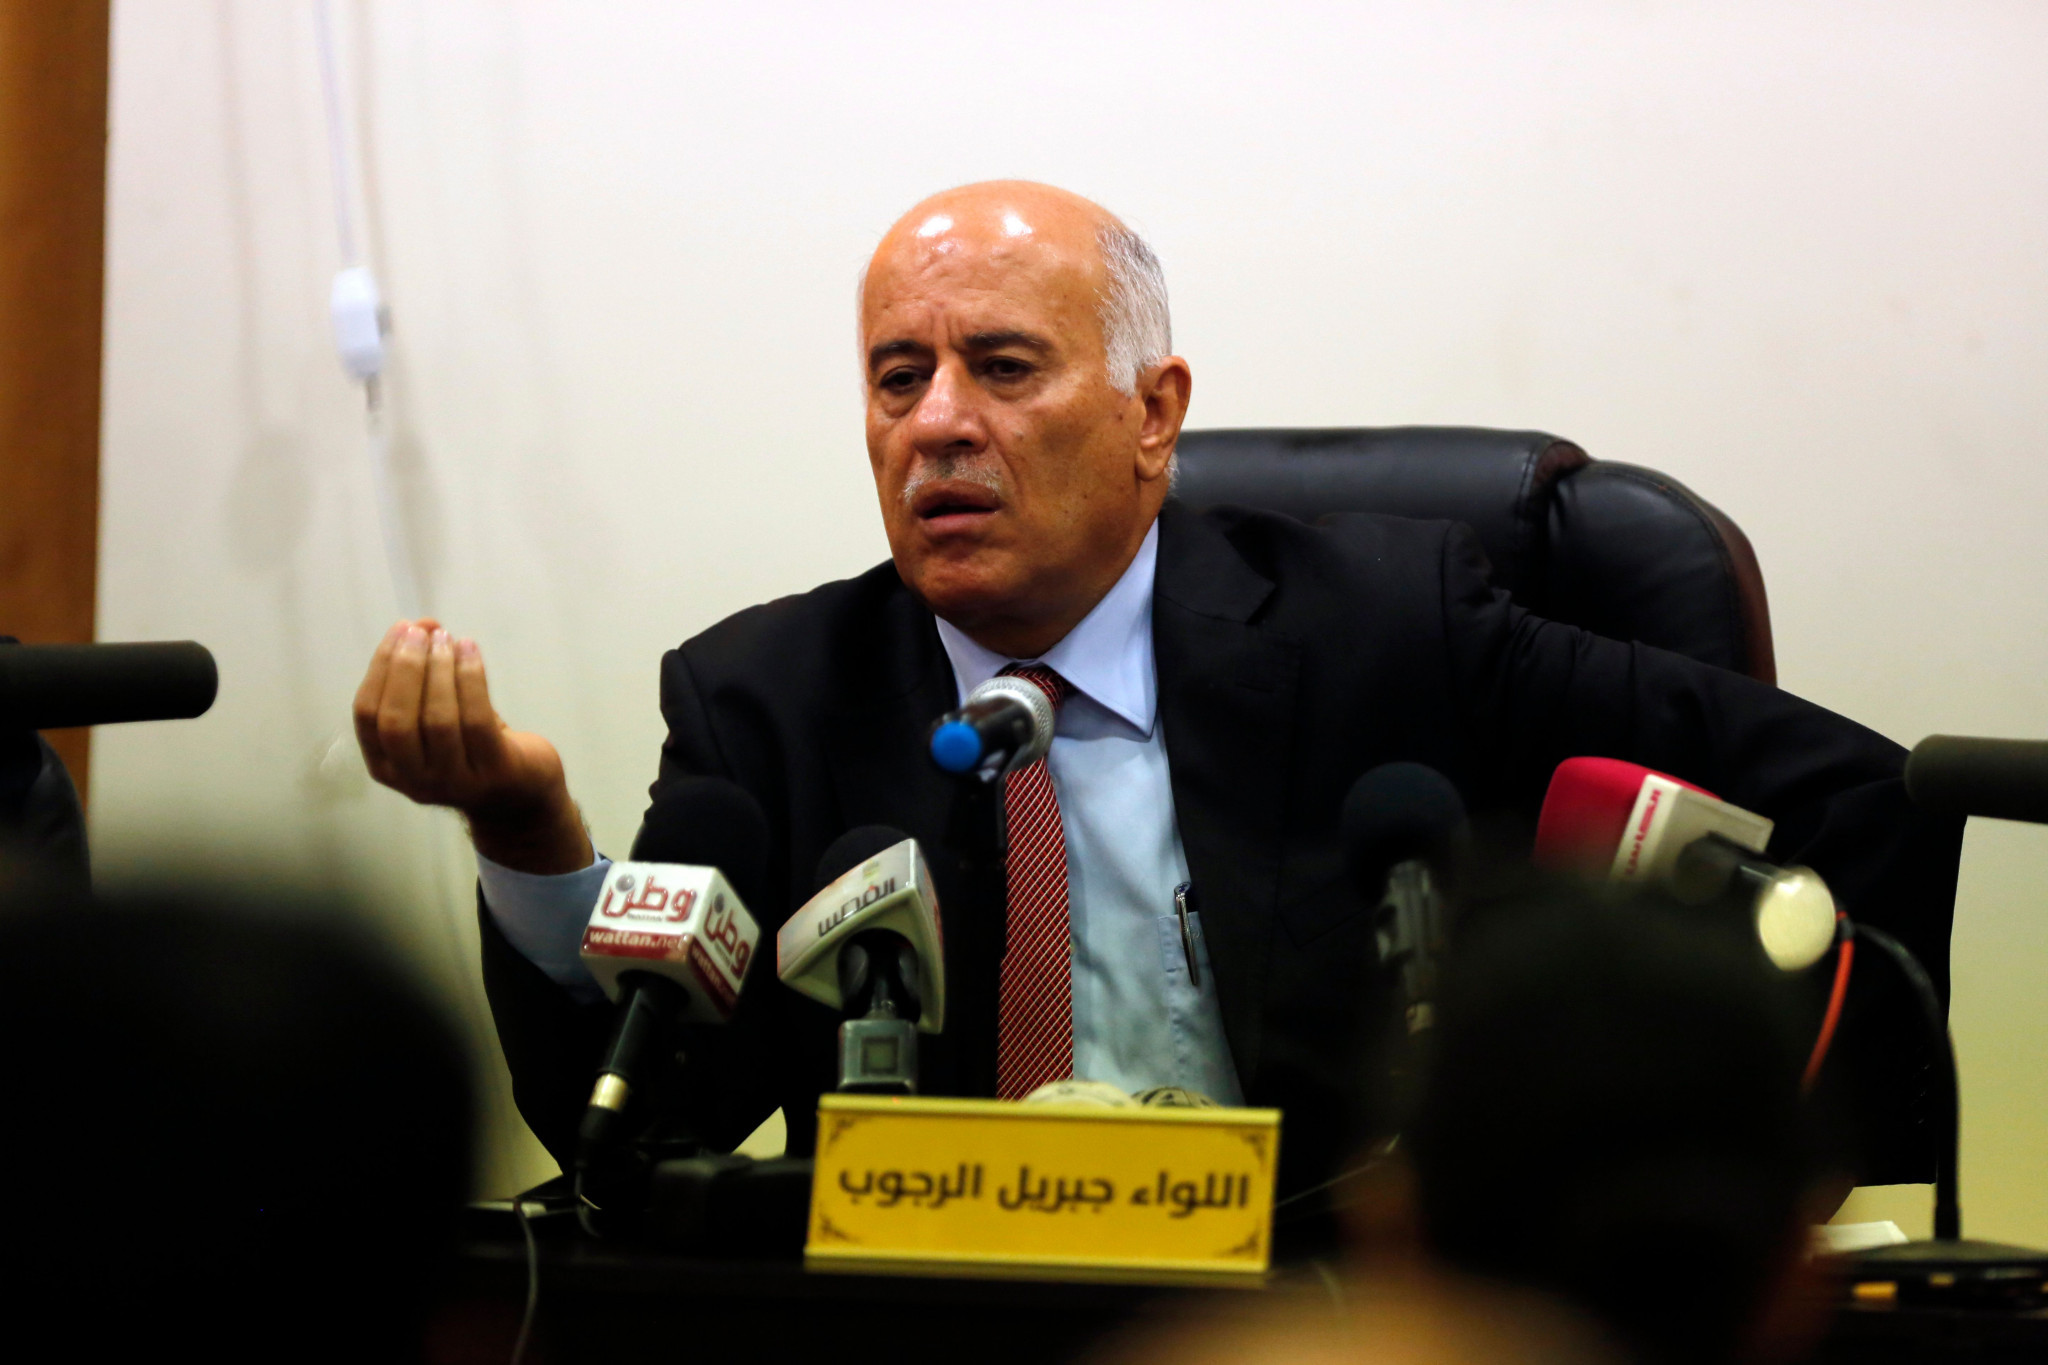 PFA chairman Jibril Rajoub says his organisation will go to the Swiss courts if their CAS appeal fails ©Getty Images